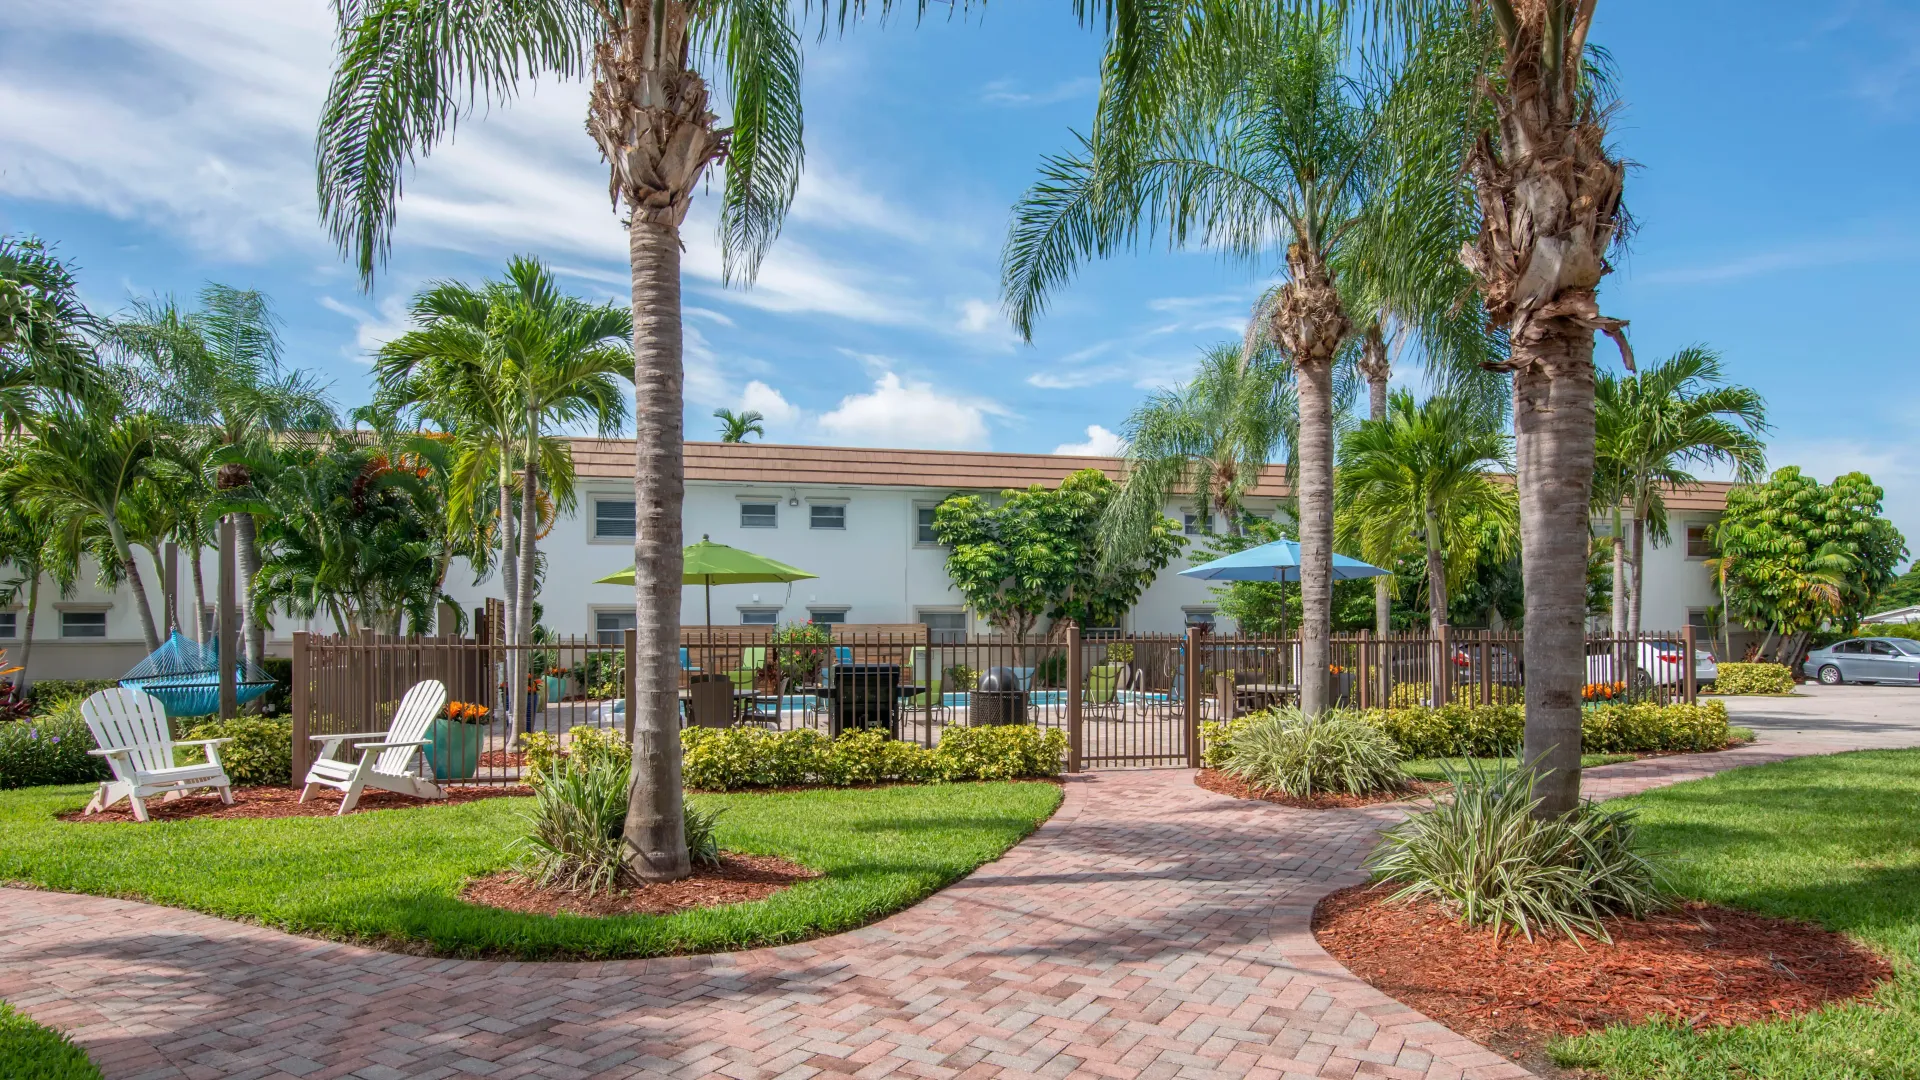 A paved walkway winding through lush, tropical landscaping, leading to the vibrant gated pool area.